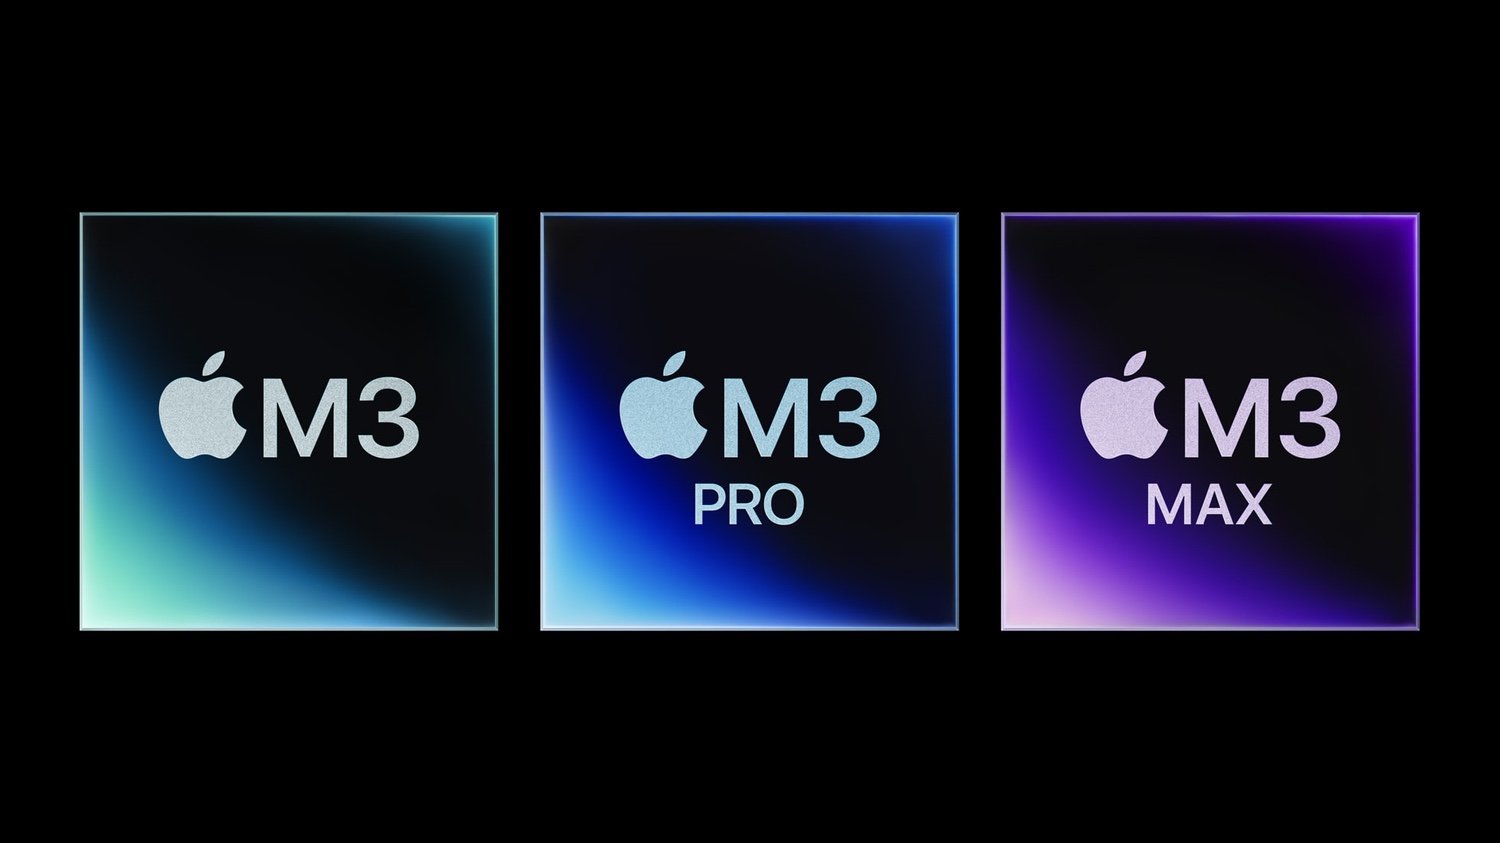 Apple introduces M3 family of chips, upgrades MacBook Pro and iMac